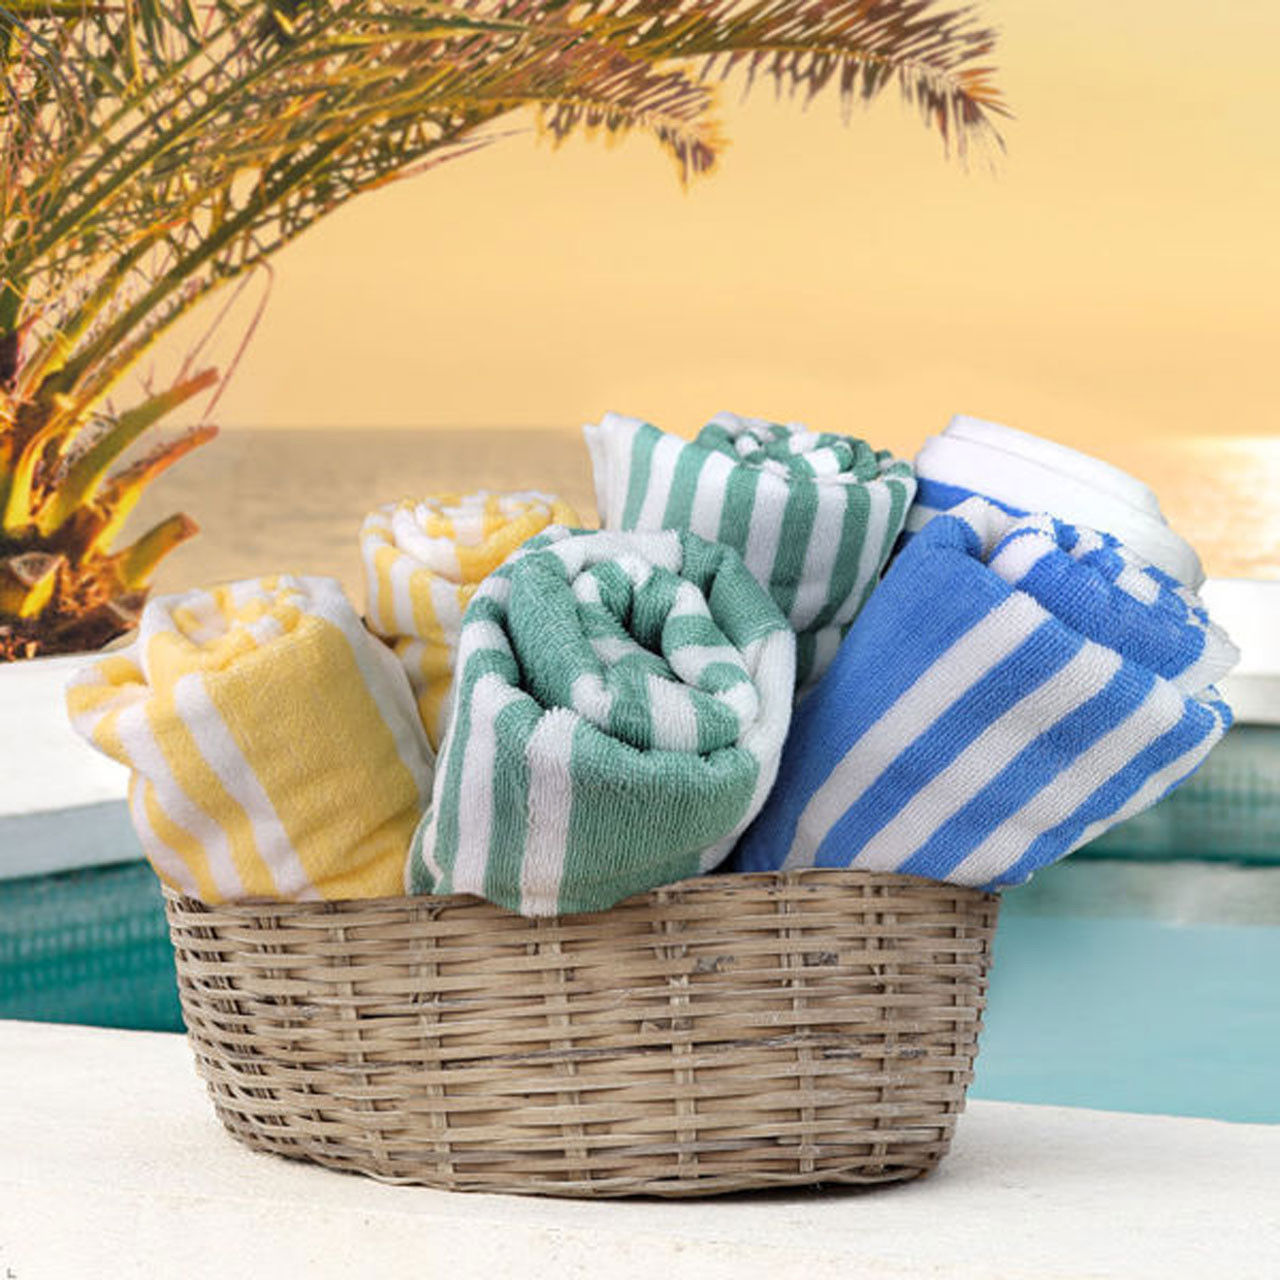 What is the color of the Playa Cabana Stripe Bulk Beach Towels?